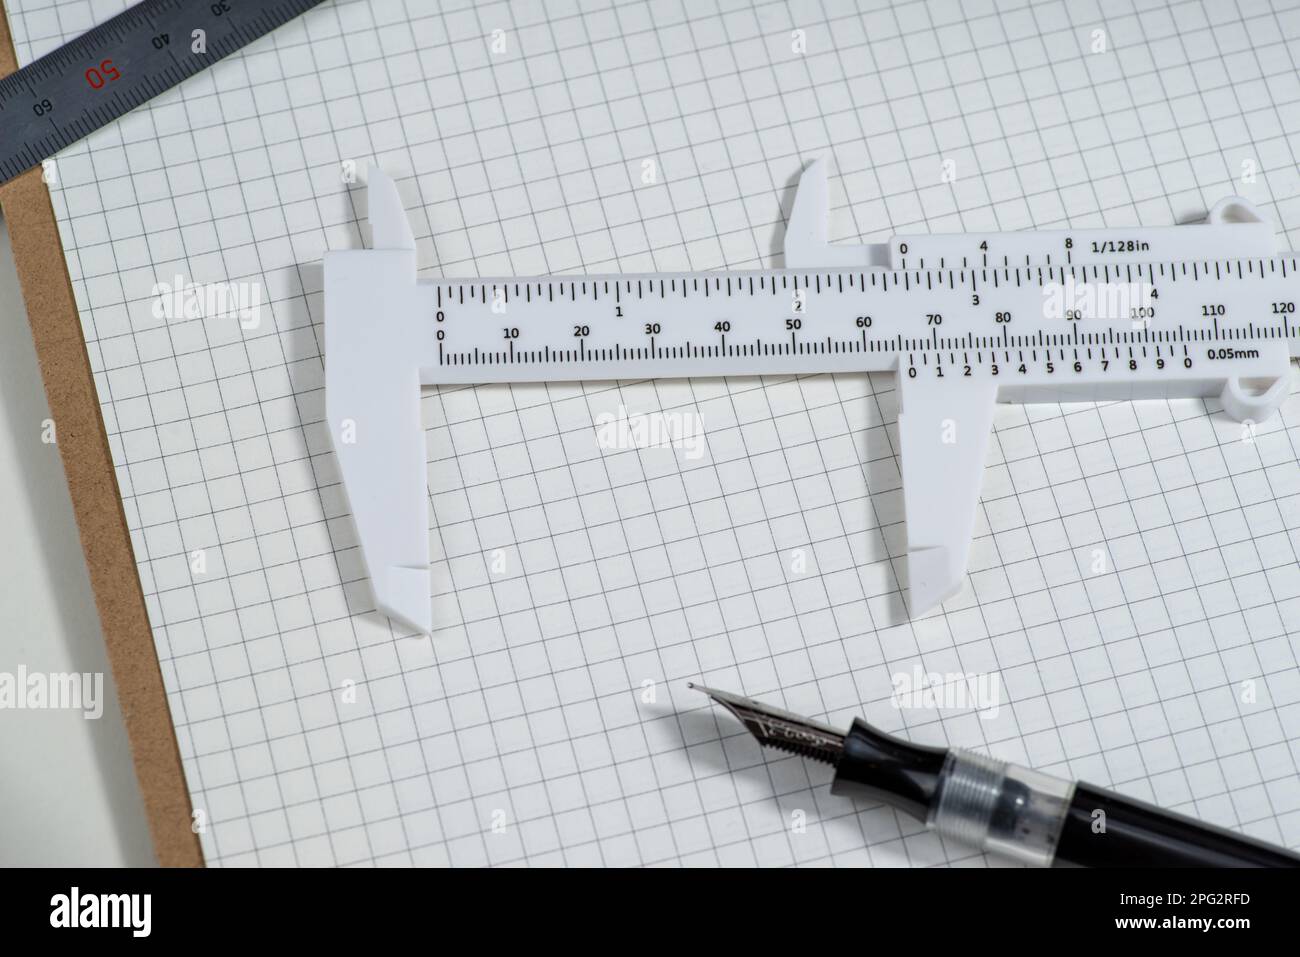 Slide calipers and handcuffs on a graph paper,copy space Stock Photo